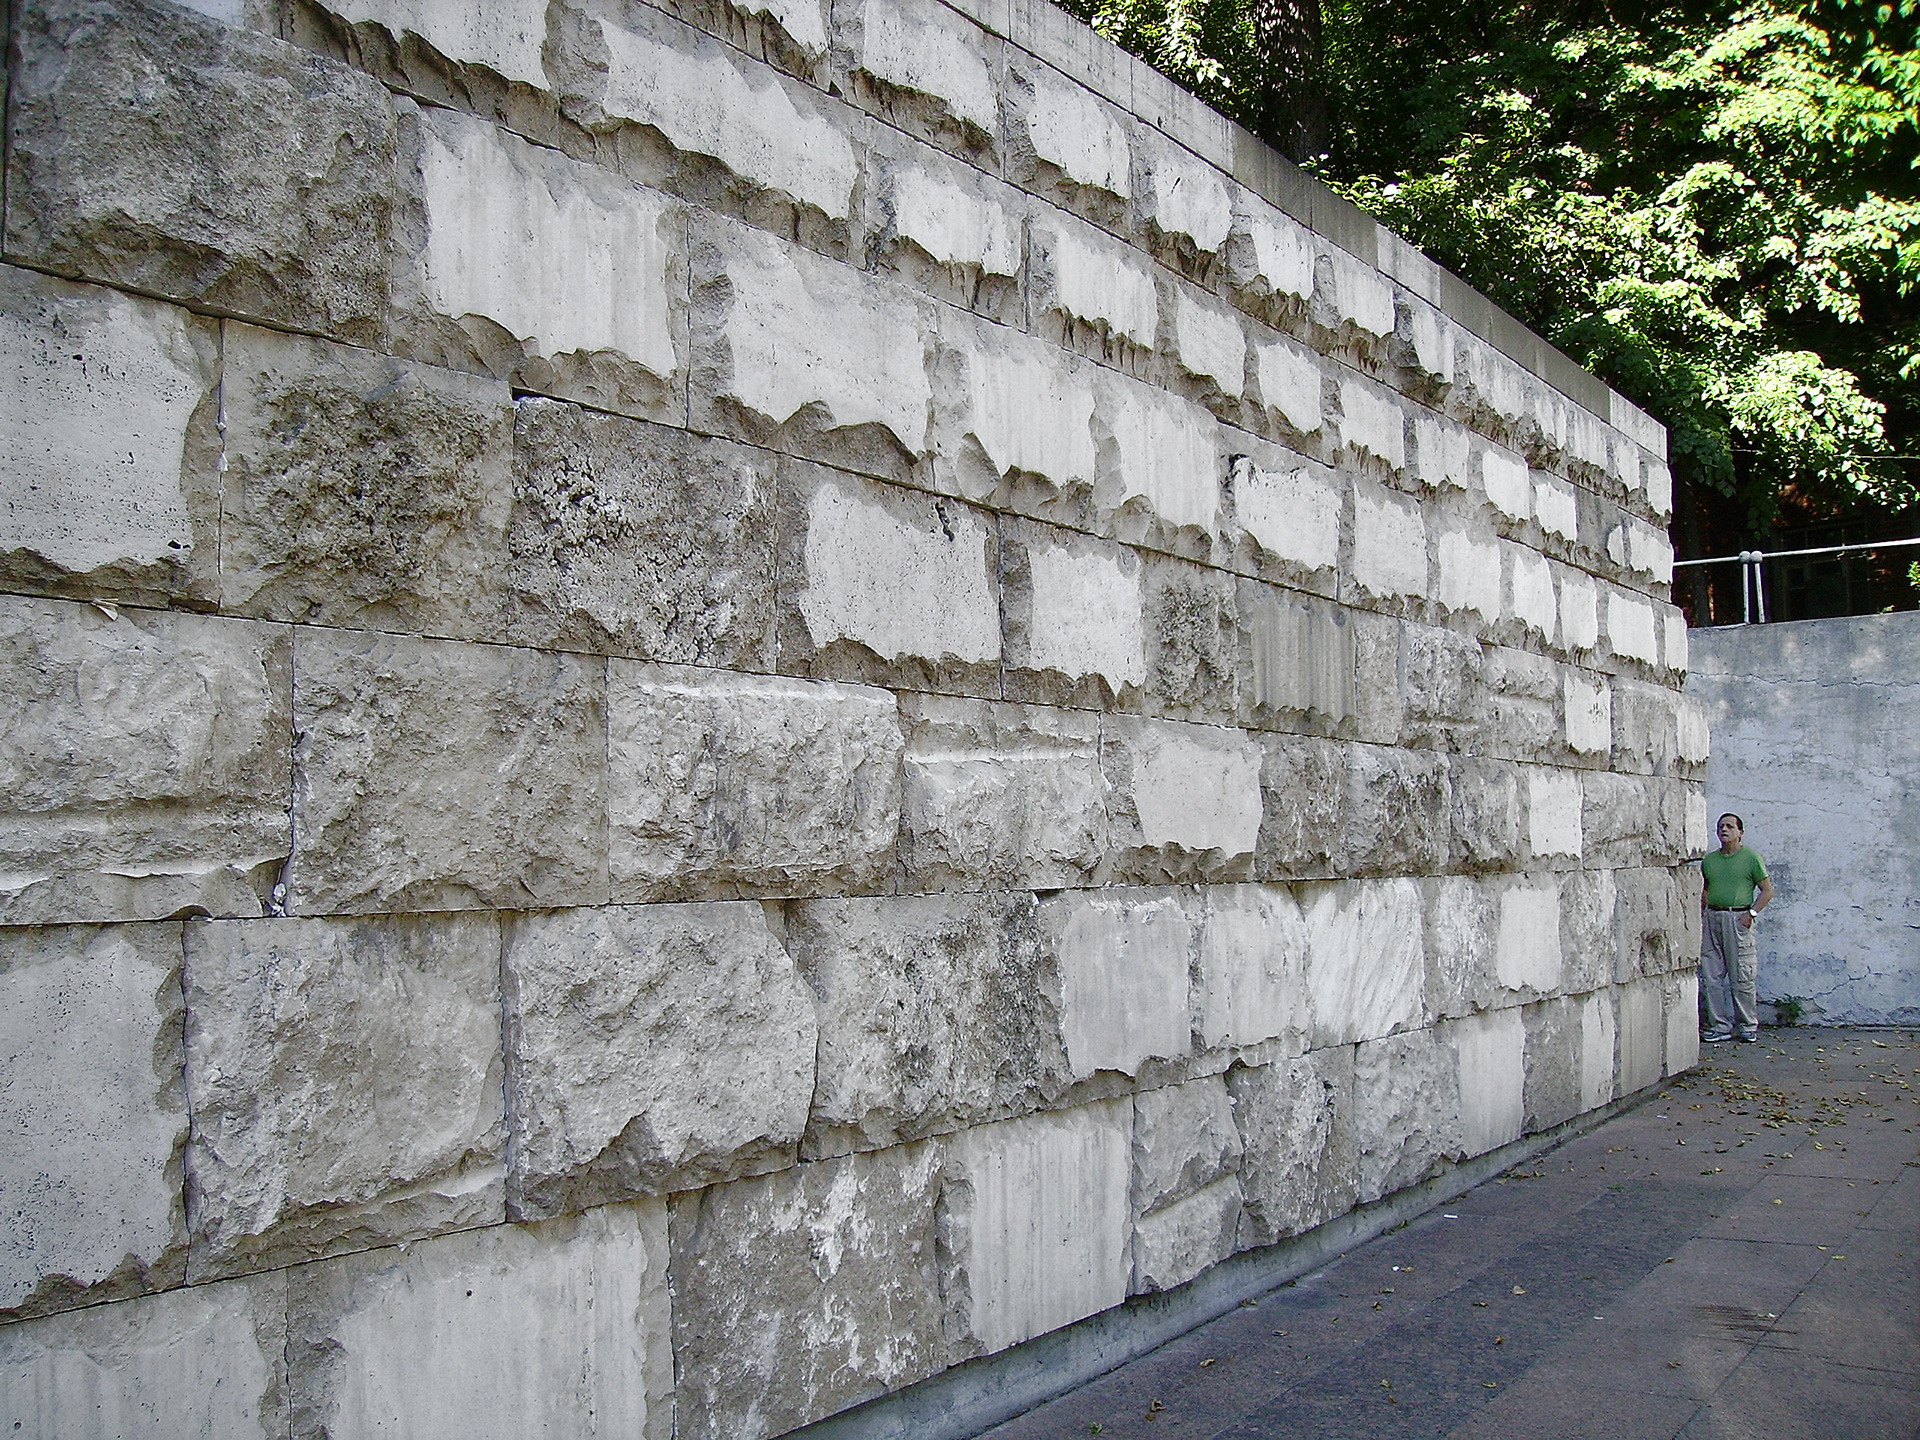 The Russian copy of the Western Wall.